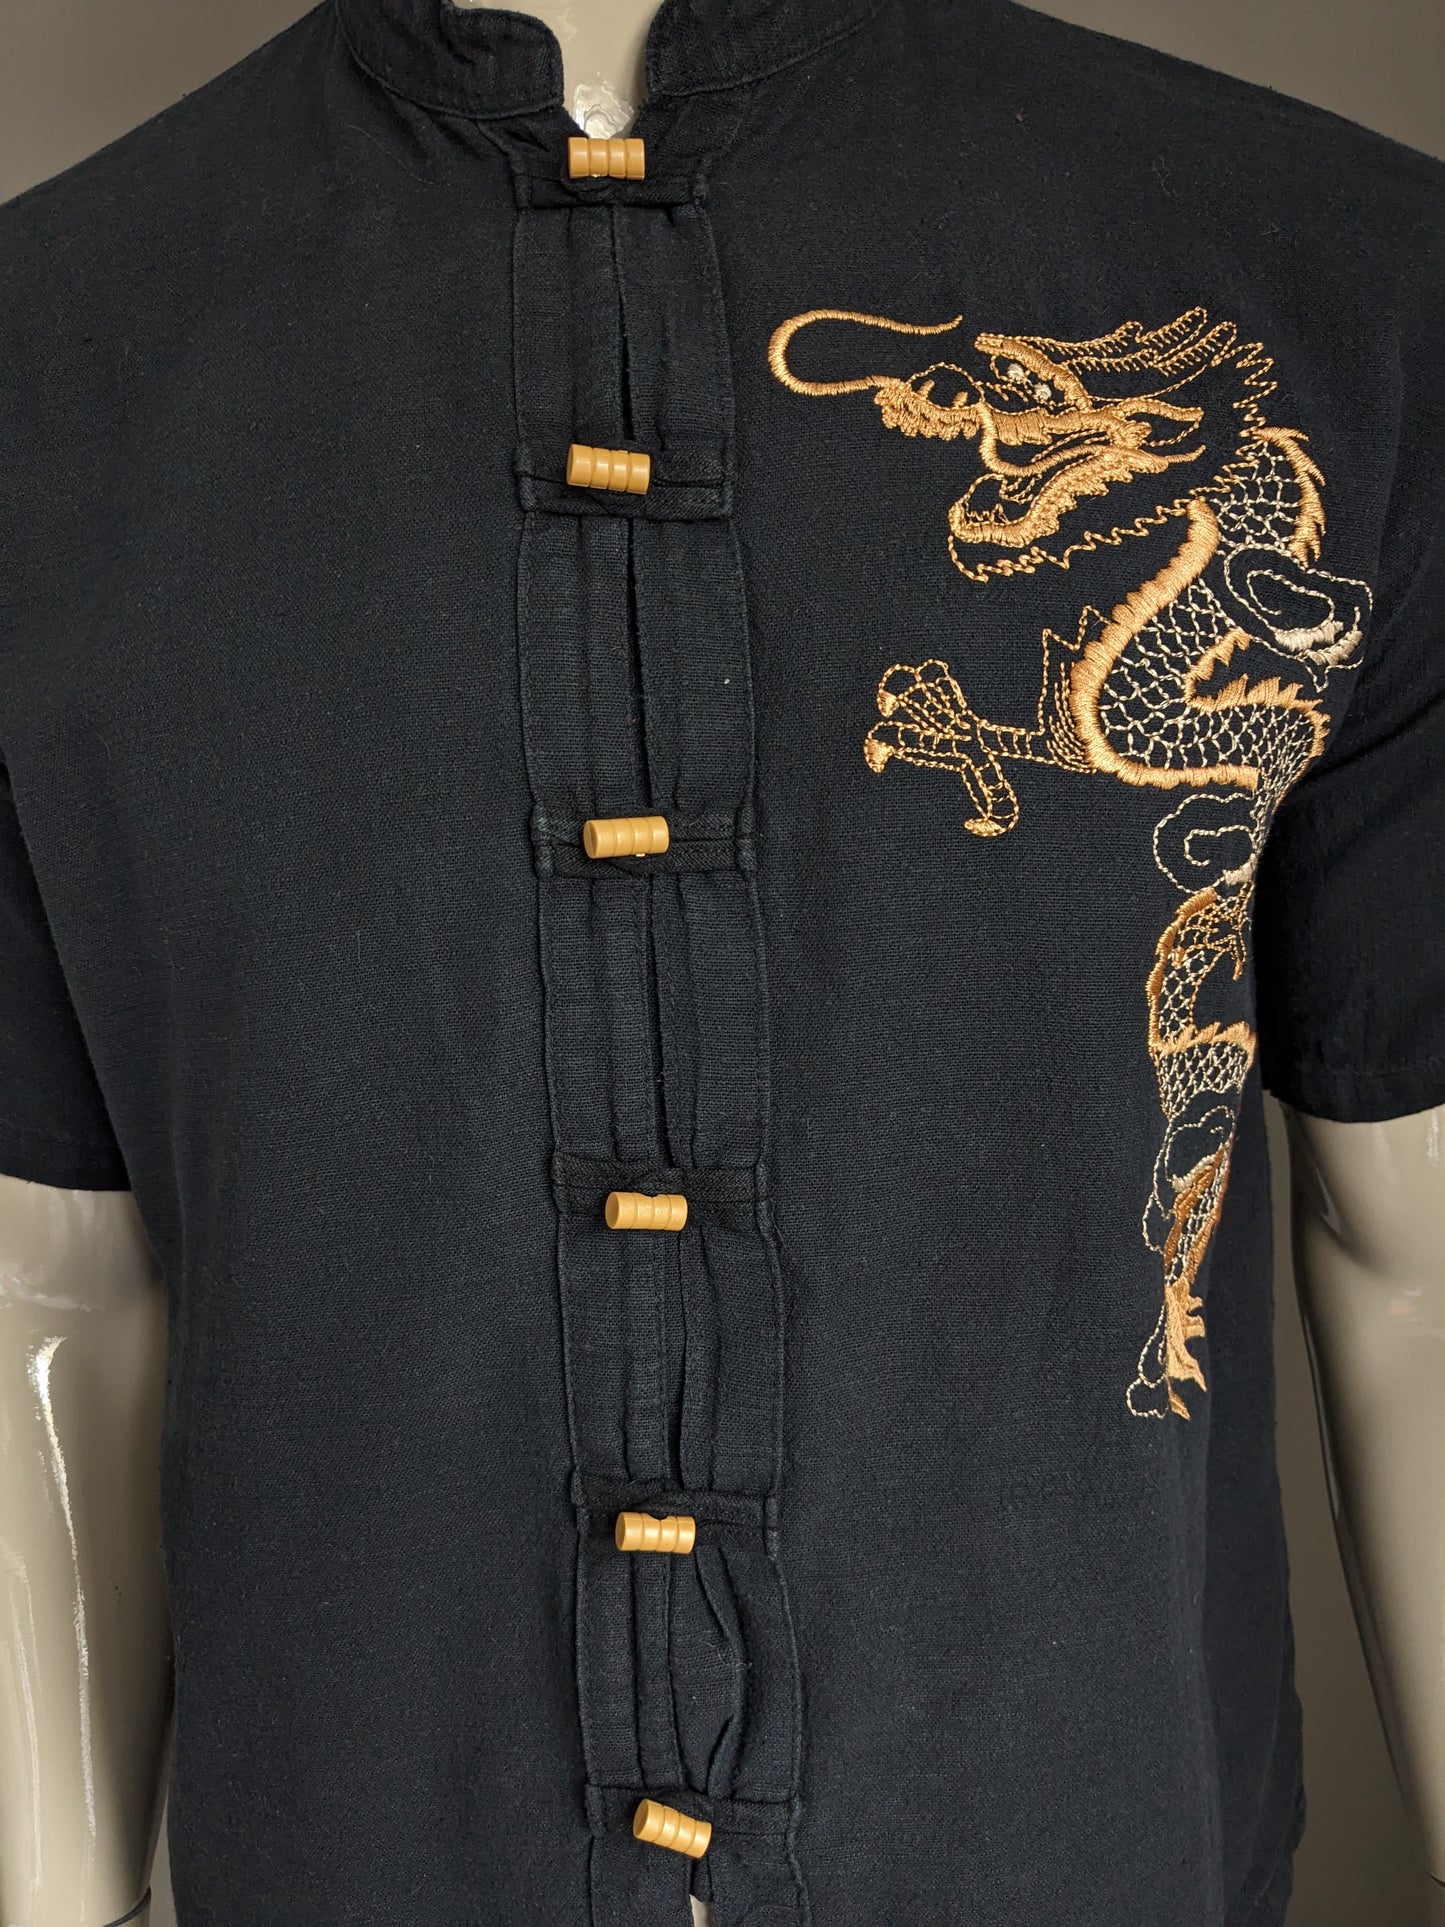 Vintage Razia shirt short sleeve with mao / farmer / raised collar. Black with embroidered dragon. Size L.